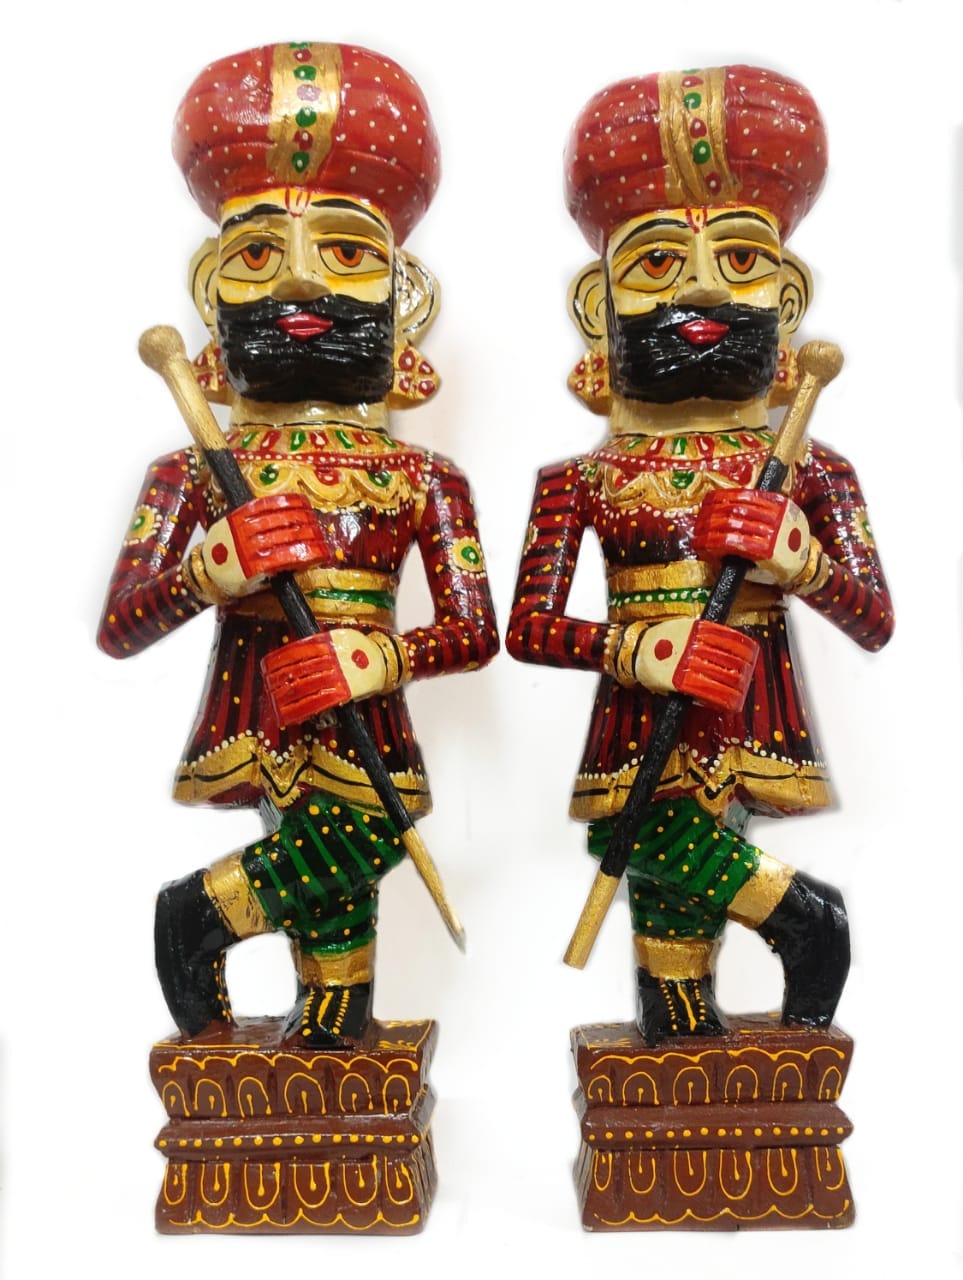 LAMANSH Multicolor / Wood / 15 Inch LAMANSH® Set of 2 Handicrafted Wooden Darbaan or Royal Guards 15 Inch Showpiece Figurine Cum Decorative Figures for Home Decor, Room Decor and Gifts